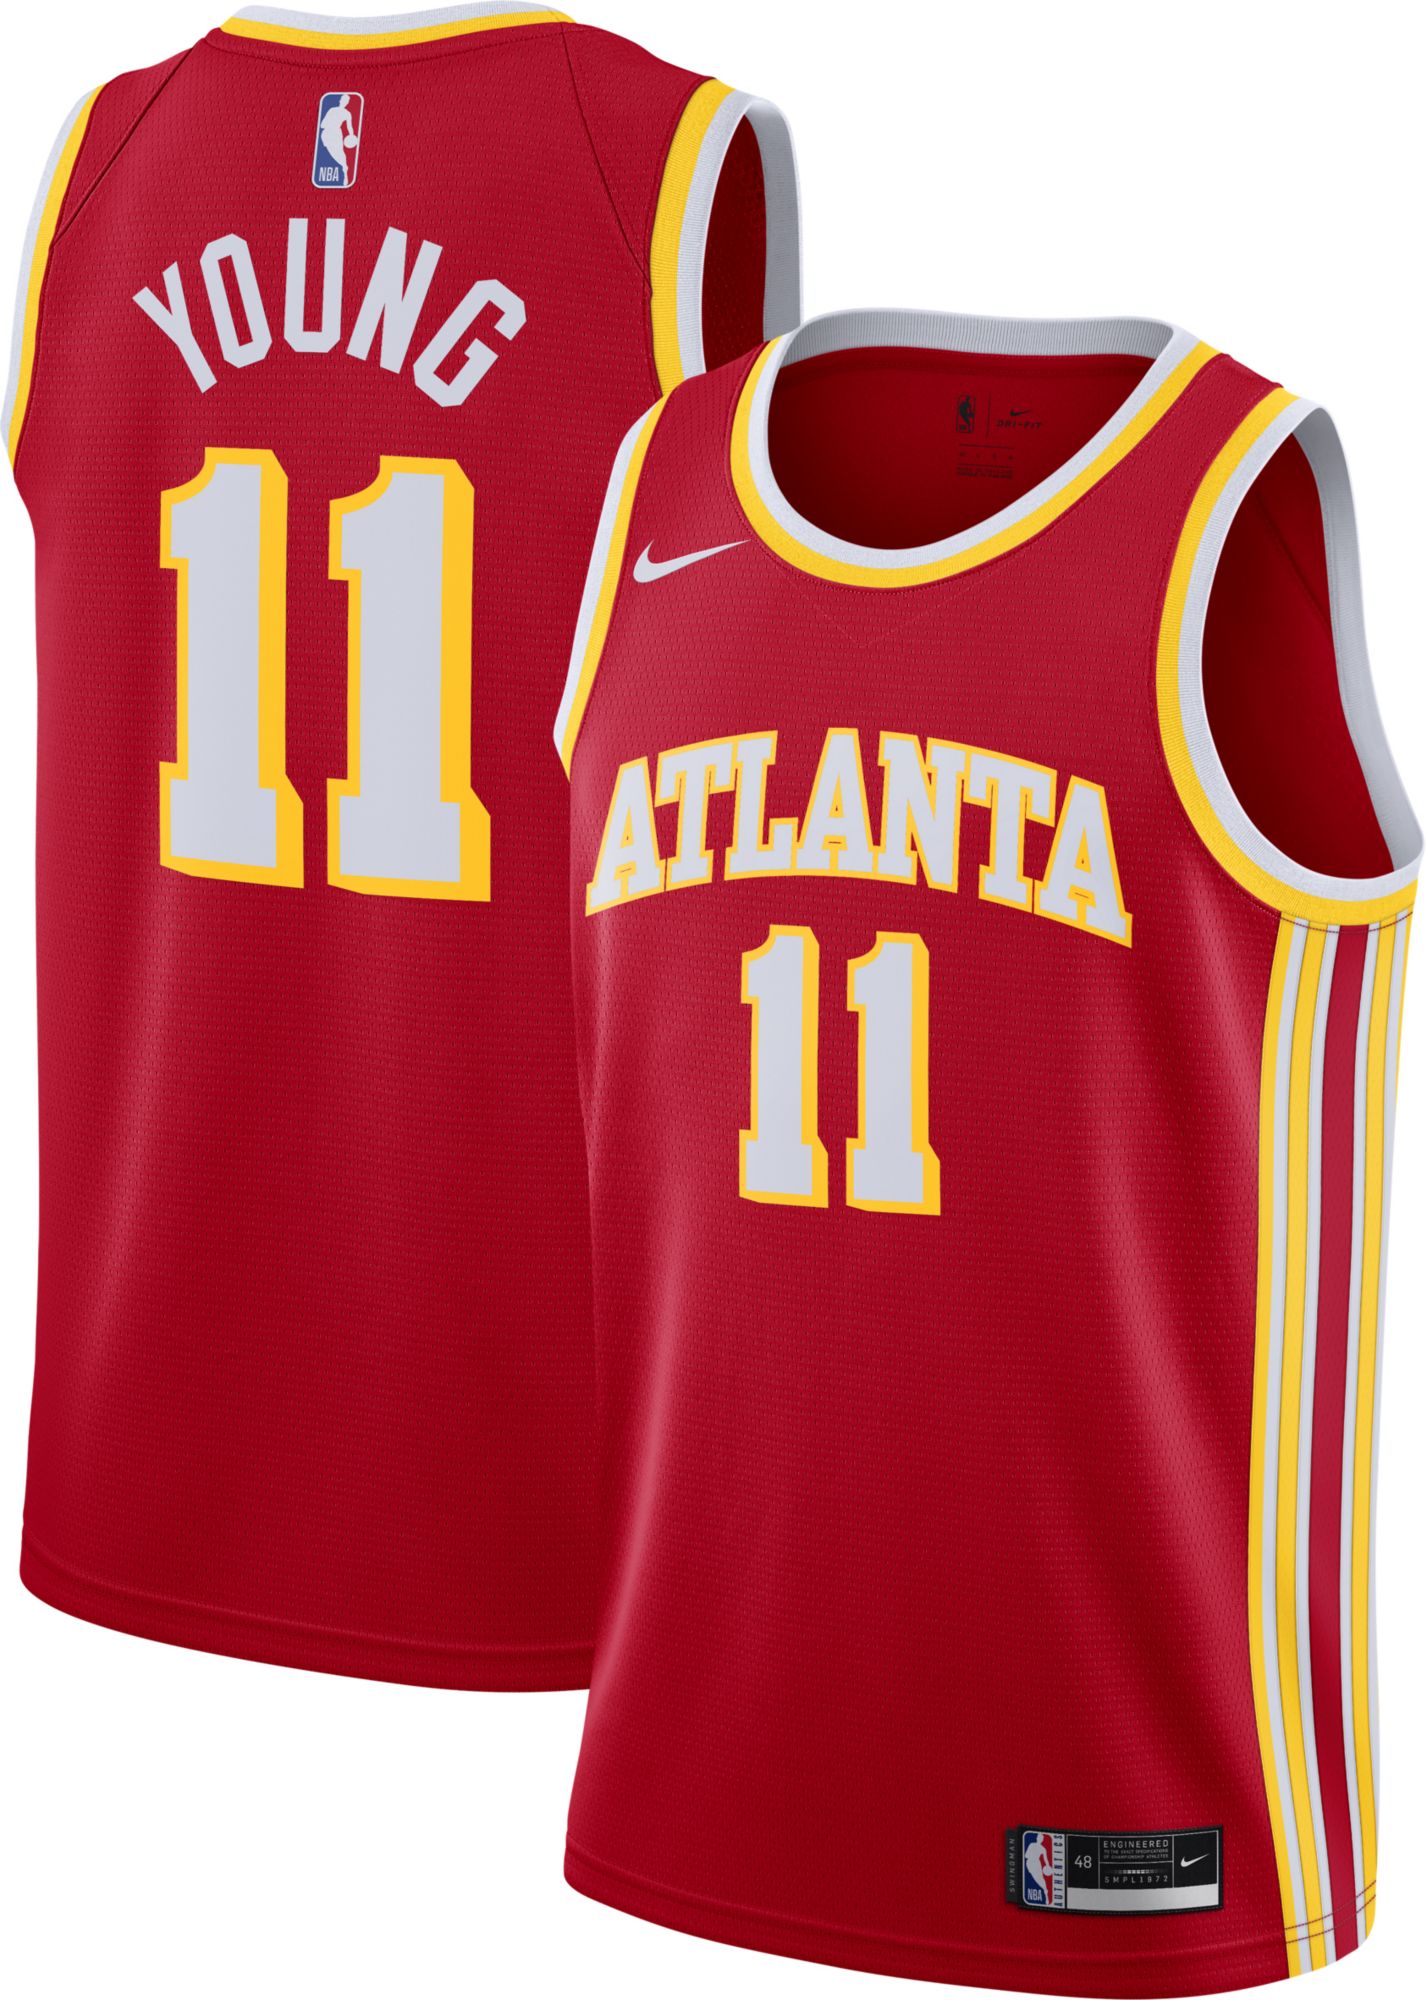 trae young jersey white